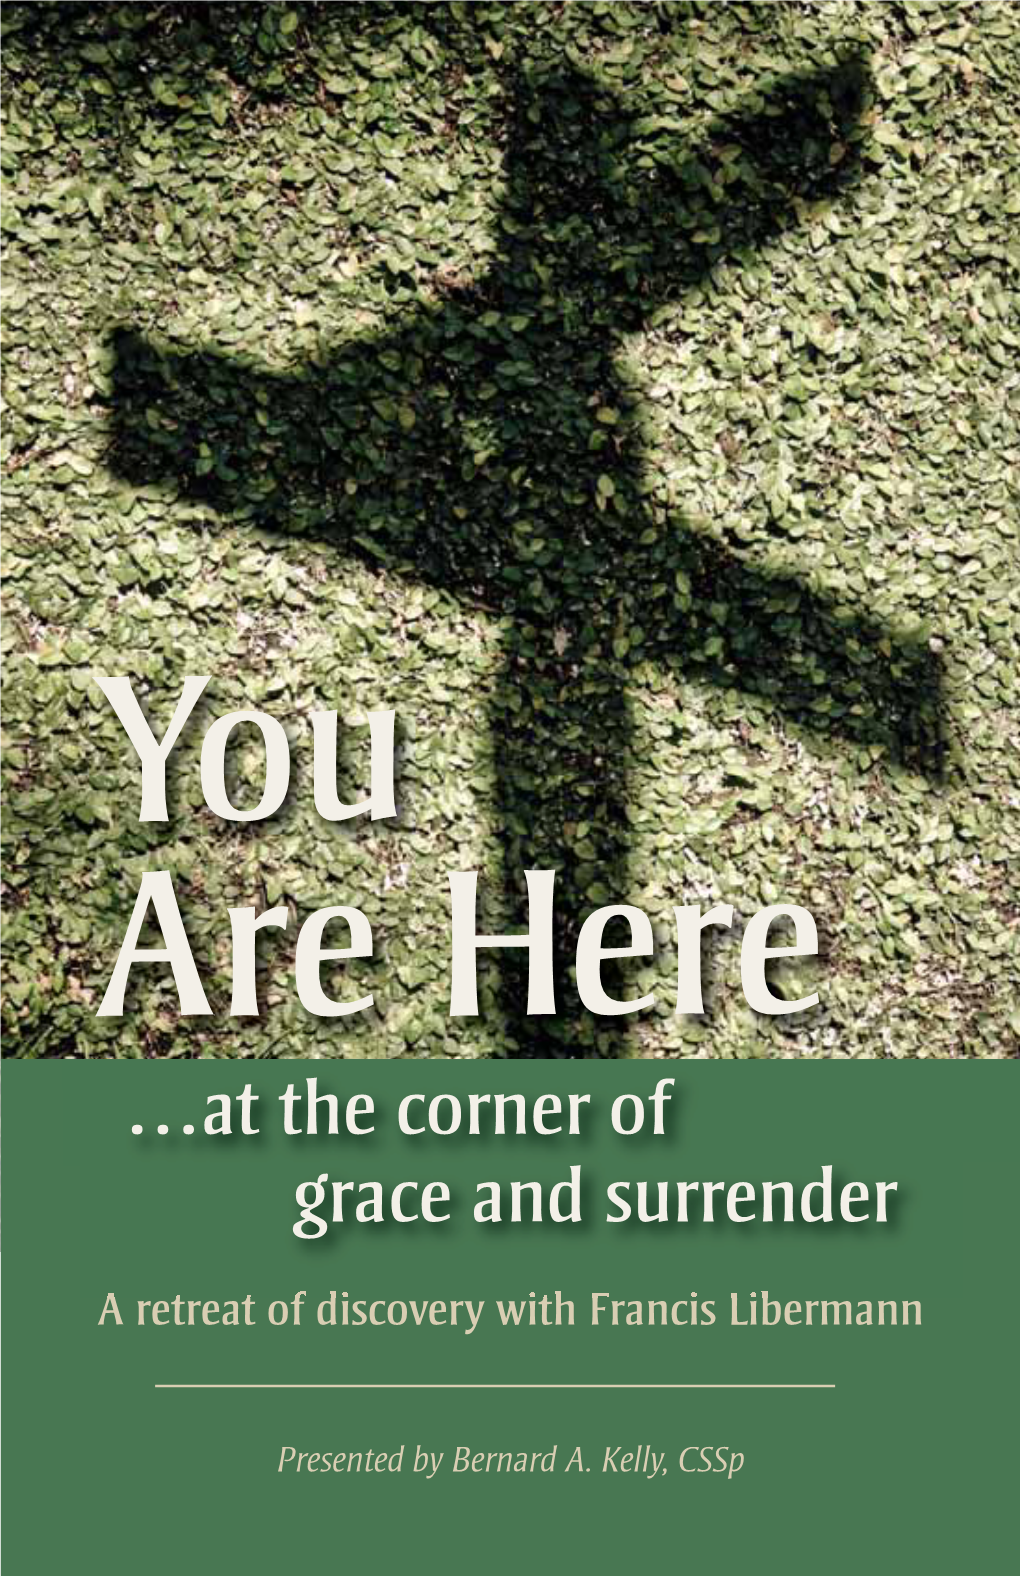 …At the Corner of Grace and Surrender